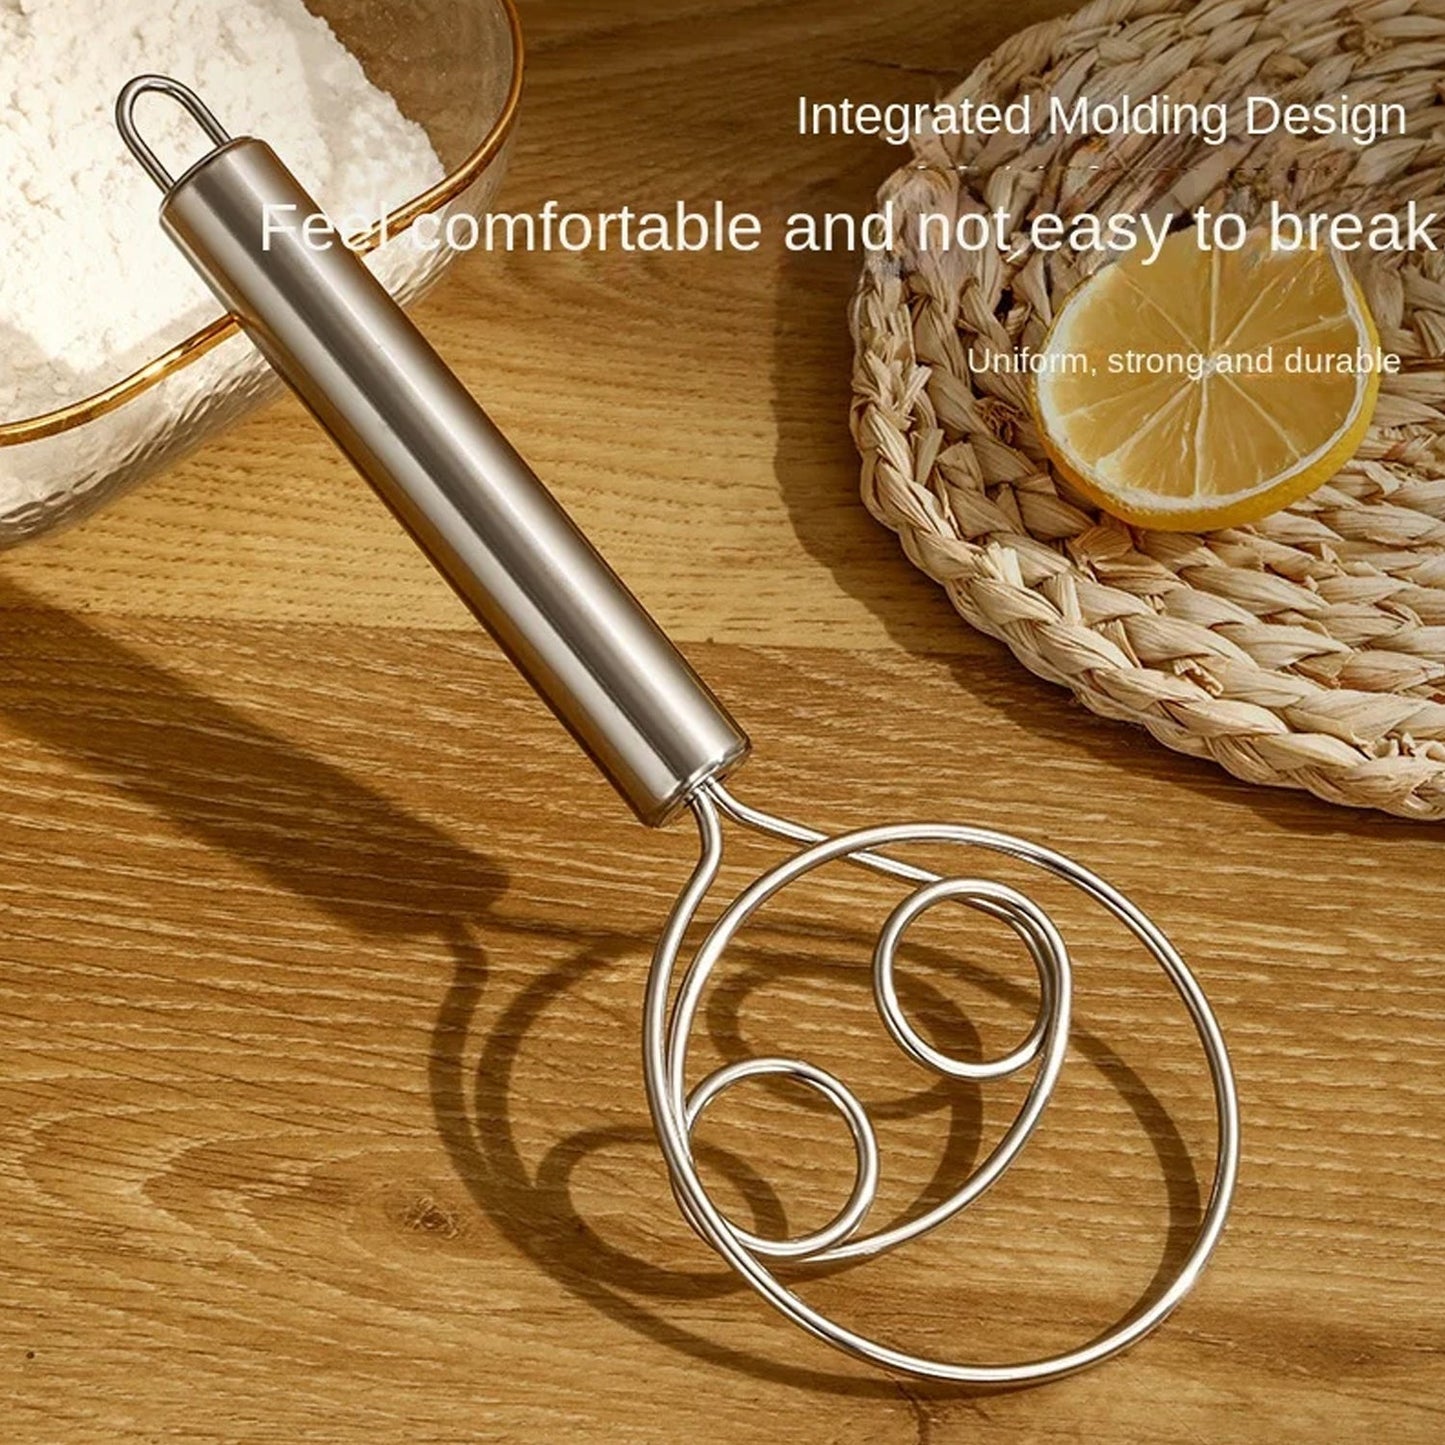 5484 Dough Whisk, Premium Stainless Steel Dutch Whisk, Dough Hand Mixer Artisan Blender For Egg, Bread, Cake, Pastry, Pizza Dough - Perfect Baking Tools, Whisking, Tirring Kitchen Tools (1 Pc)